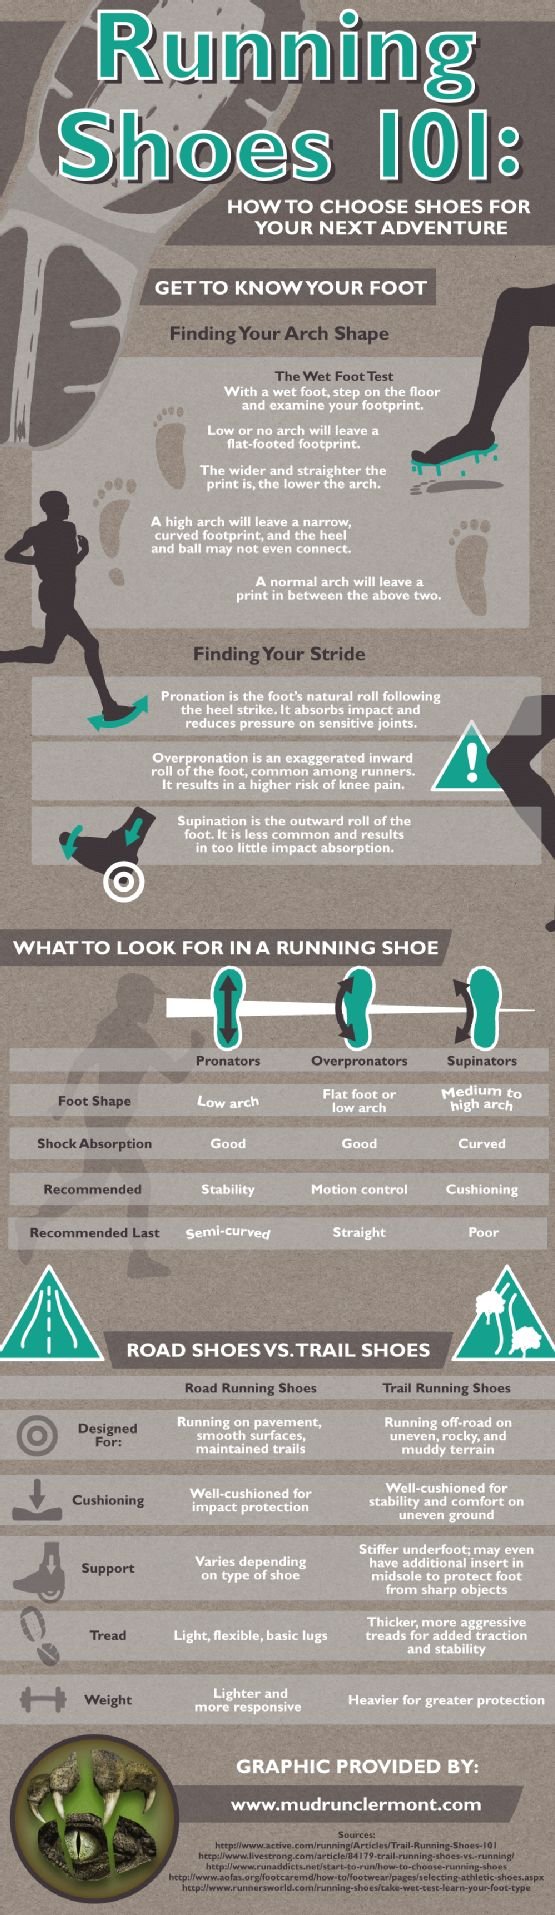 running shoes 101